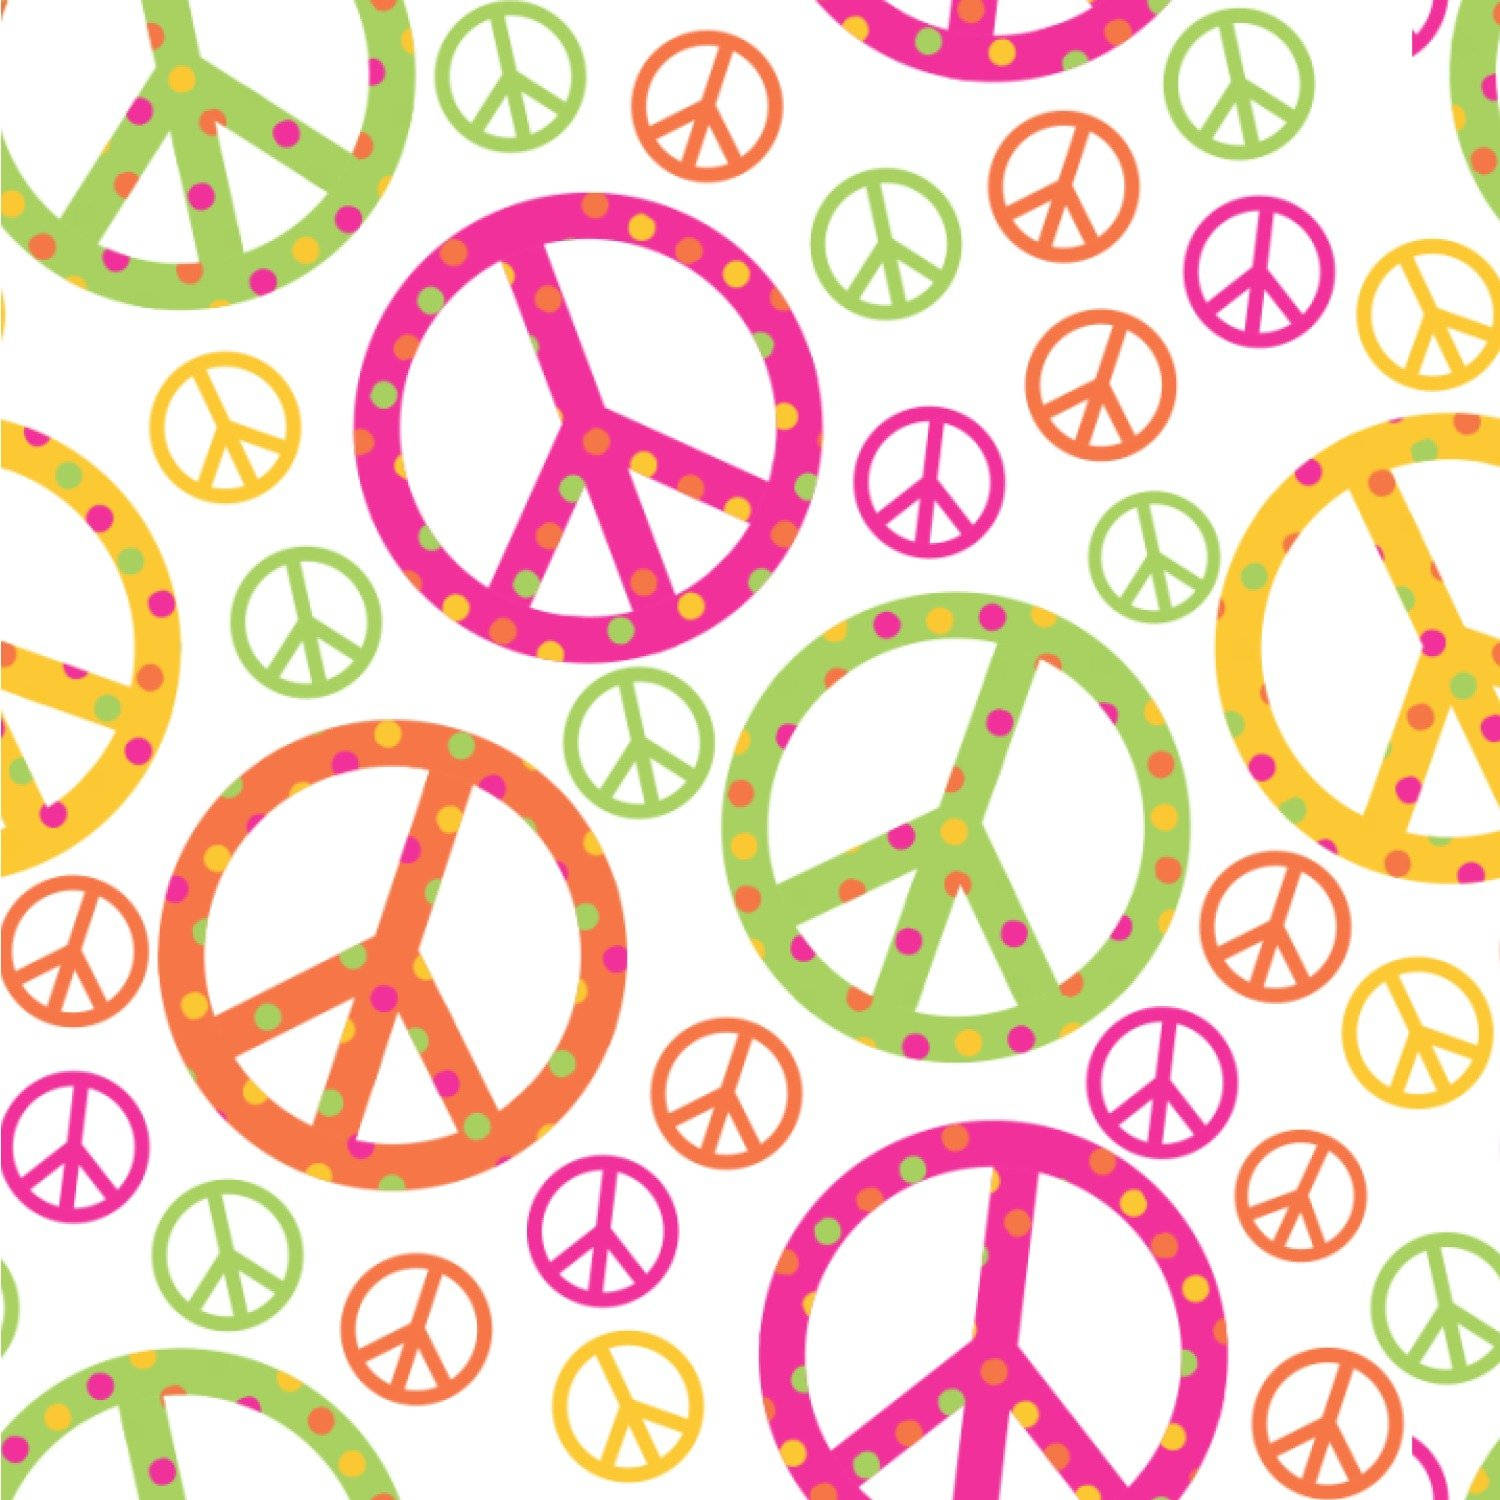 Colorful Peace Symbol With Polka Dots Wallpaper